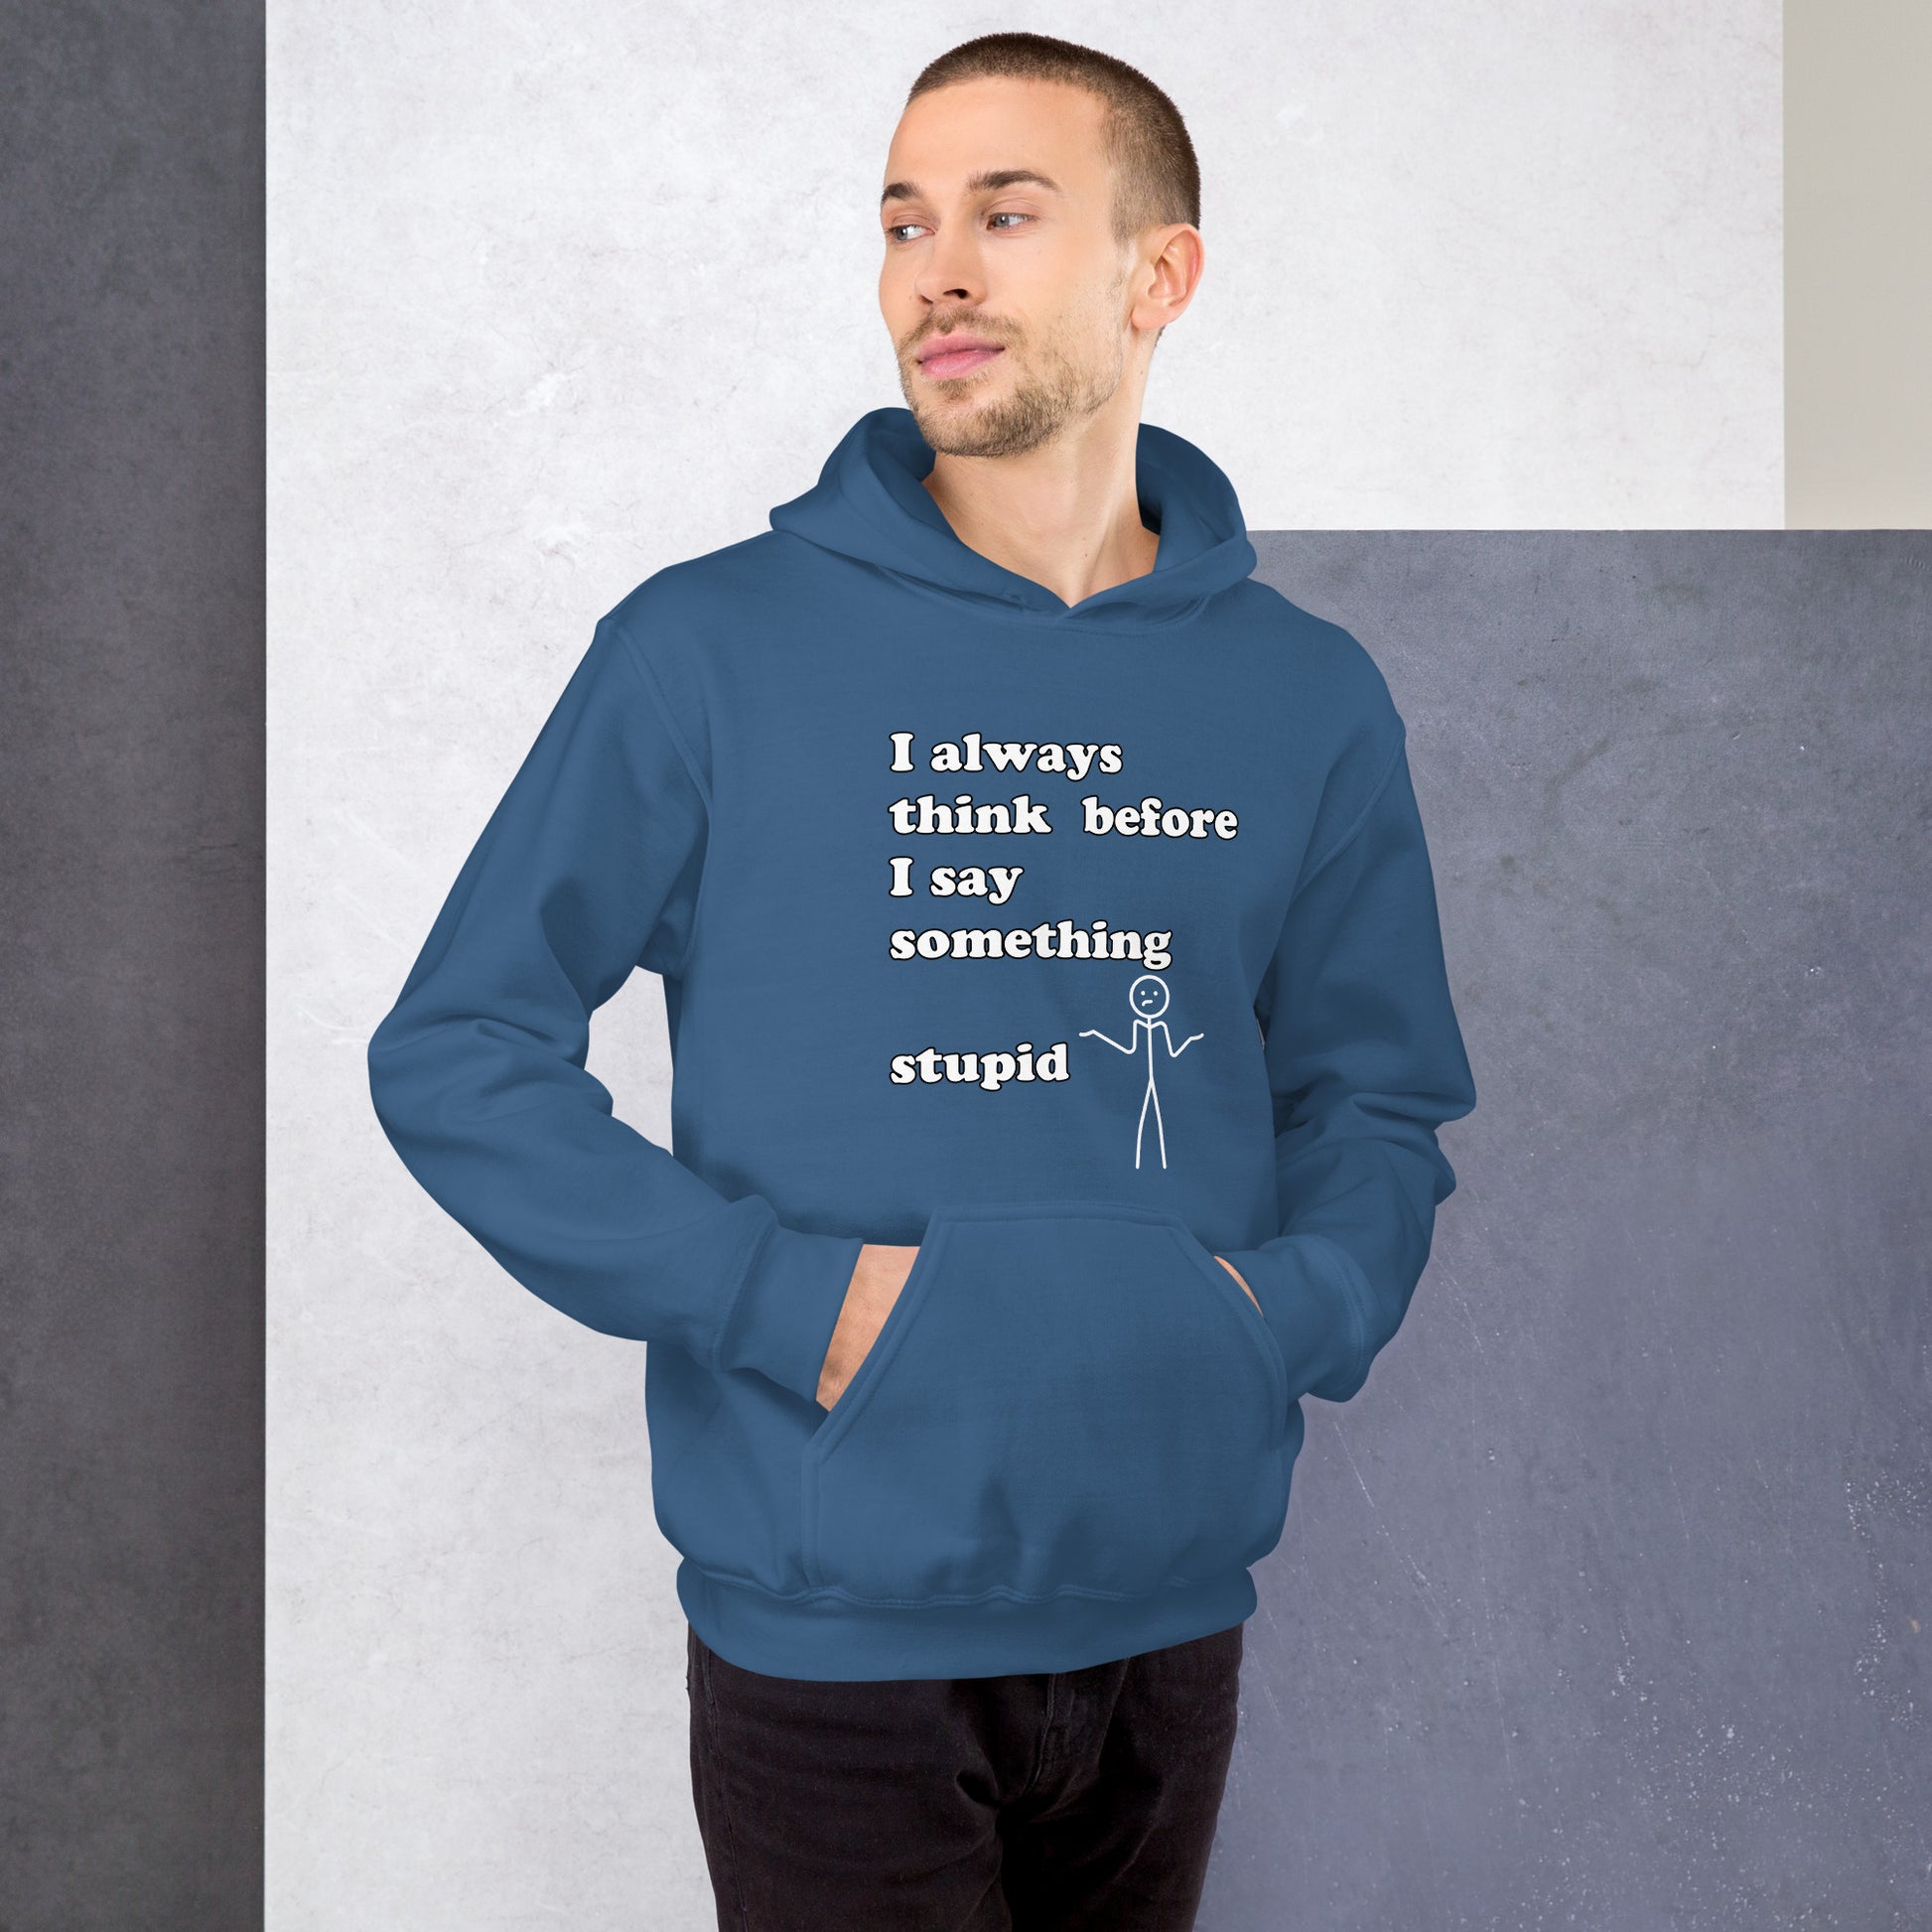 Man with indigo blue hoodie with text "I always think before I say something stupid"